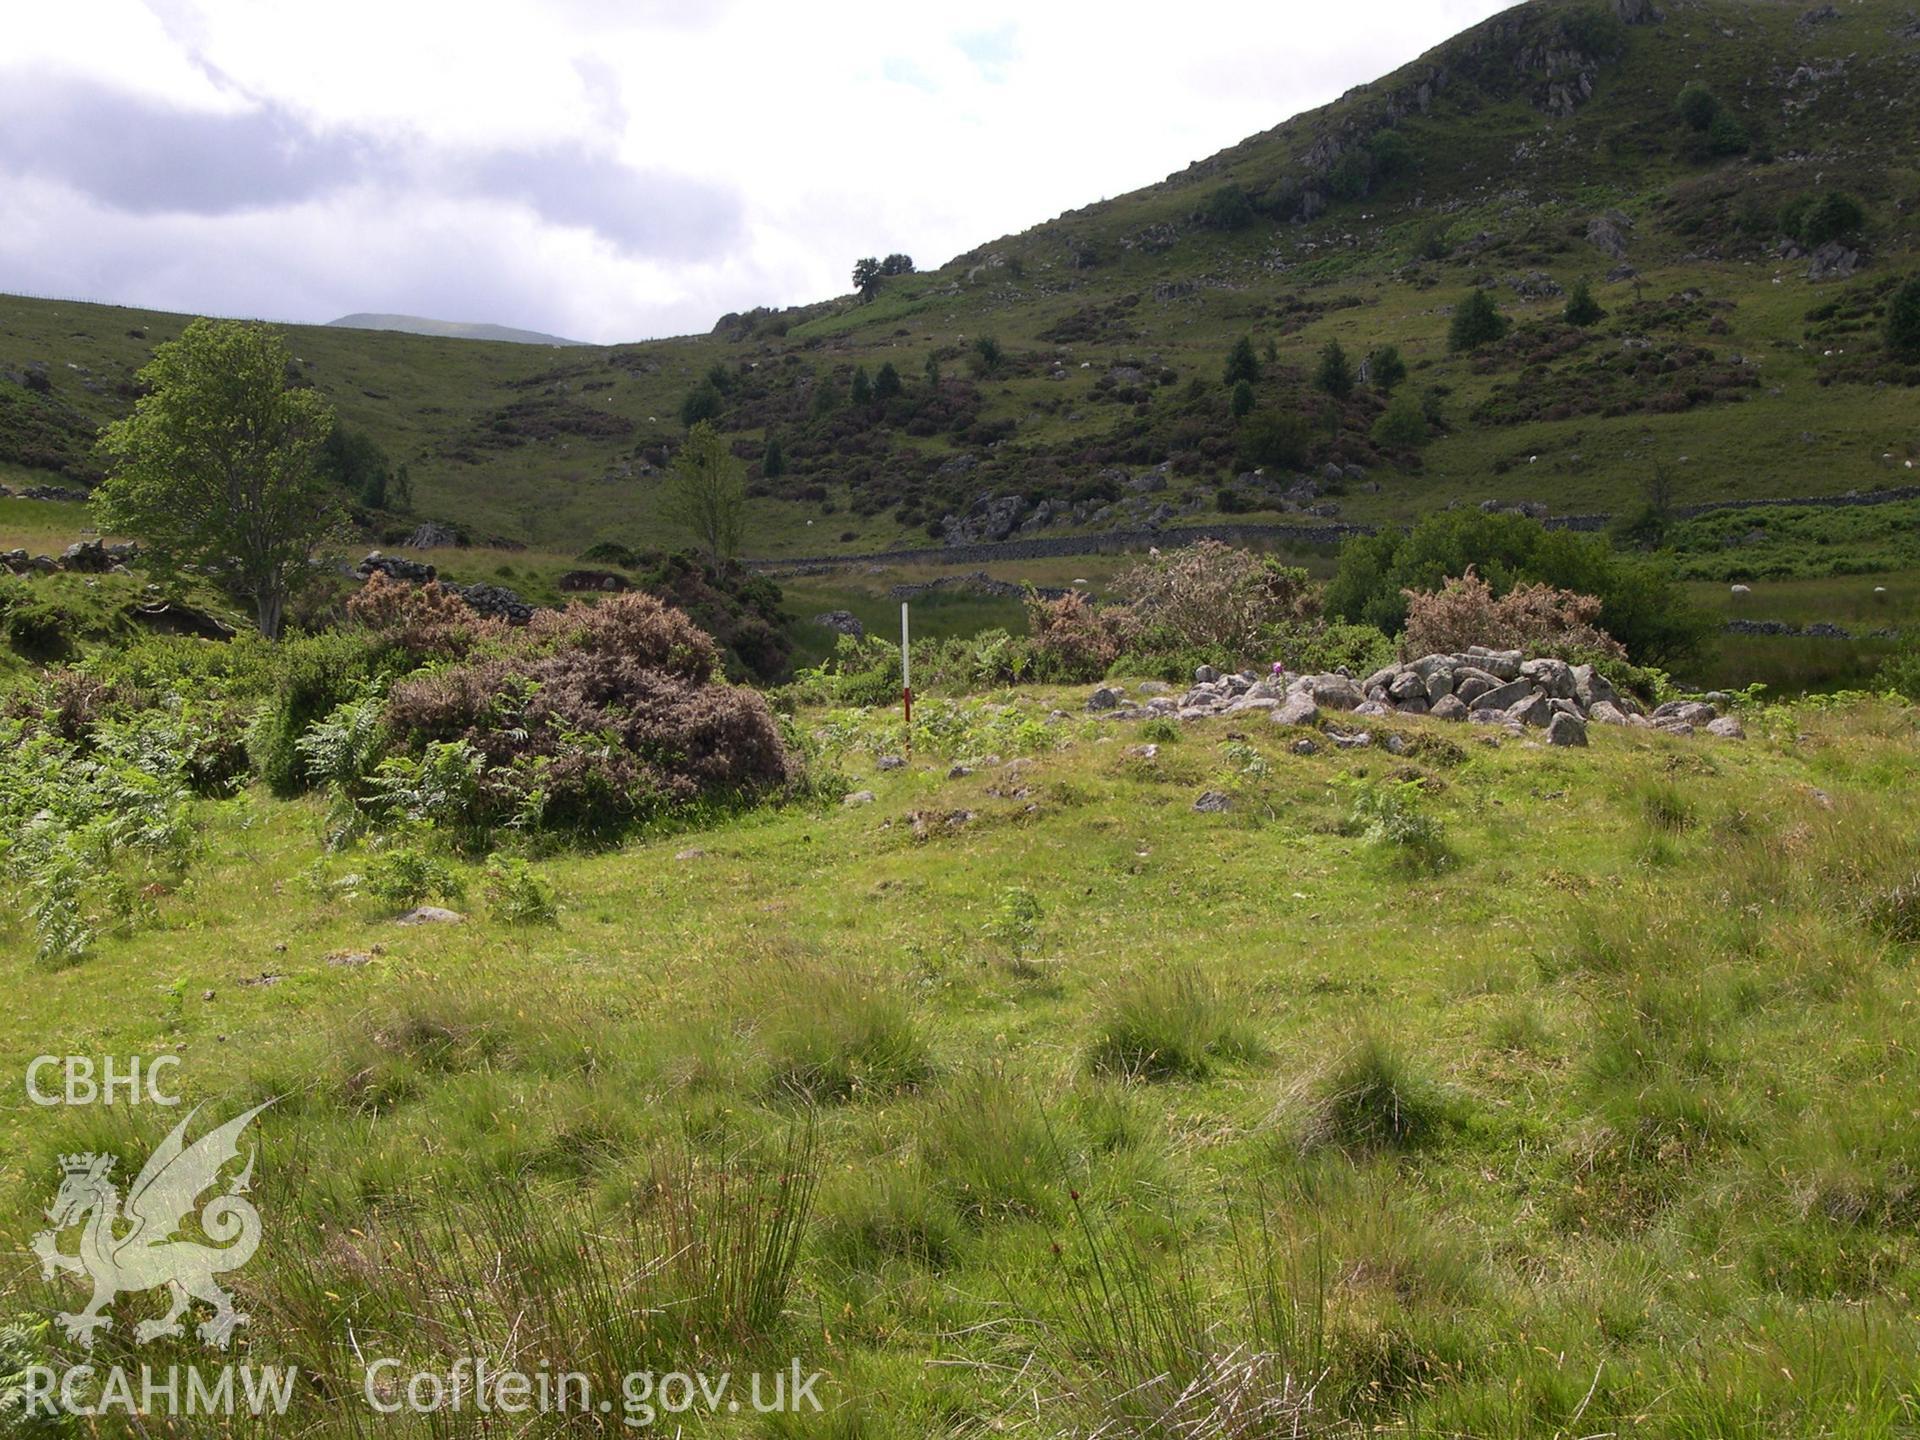 Digital photograph of Afon Dulyn Hut Circle from the South. Taken on 02/07/04 by A. Lane during the Eastern Snowdonia (Central) Upland Survey.